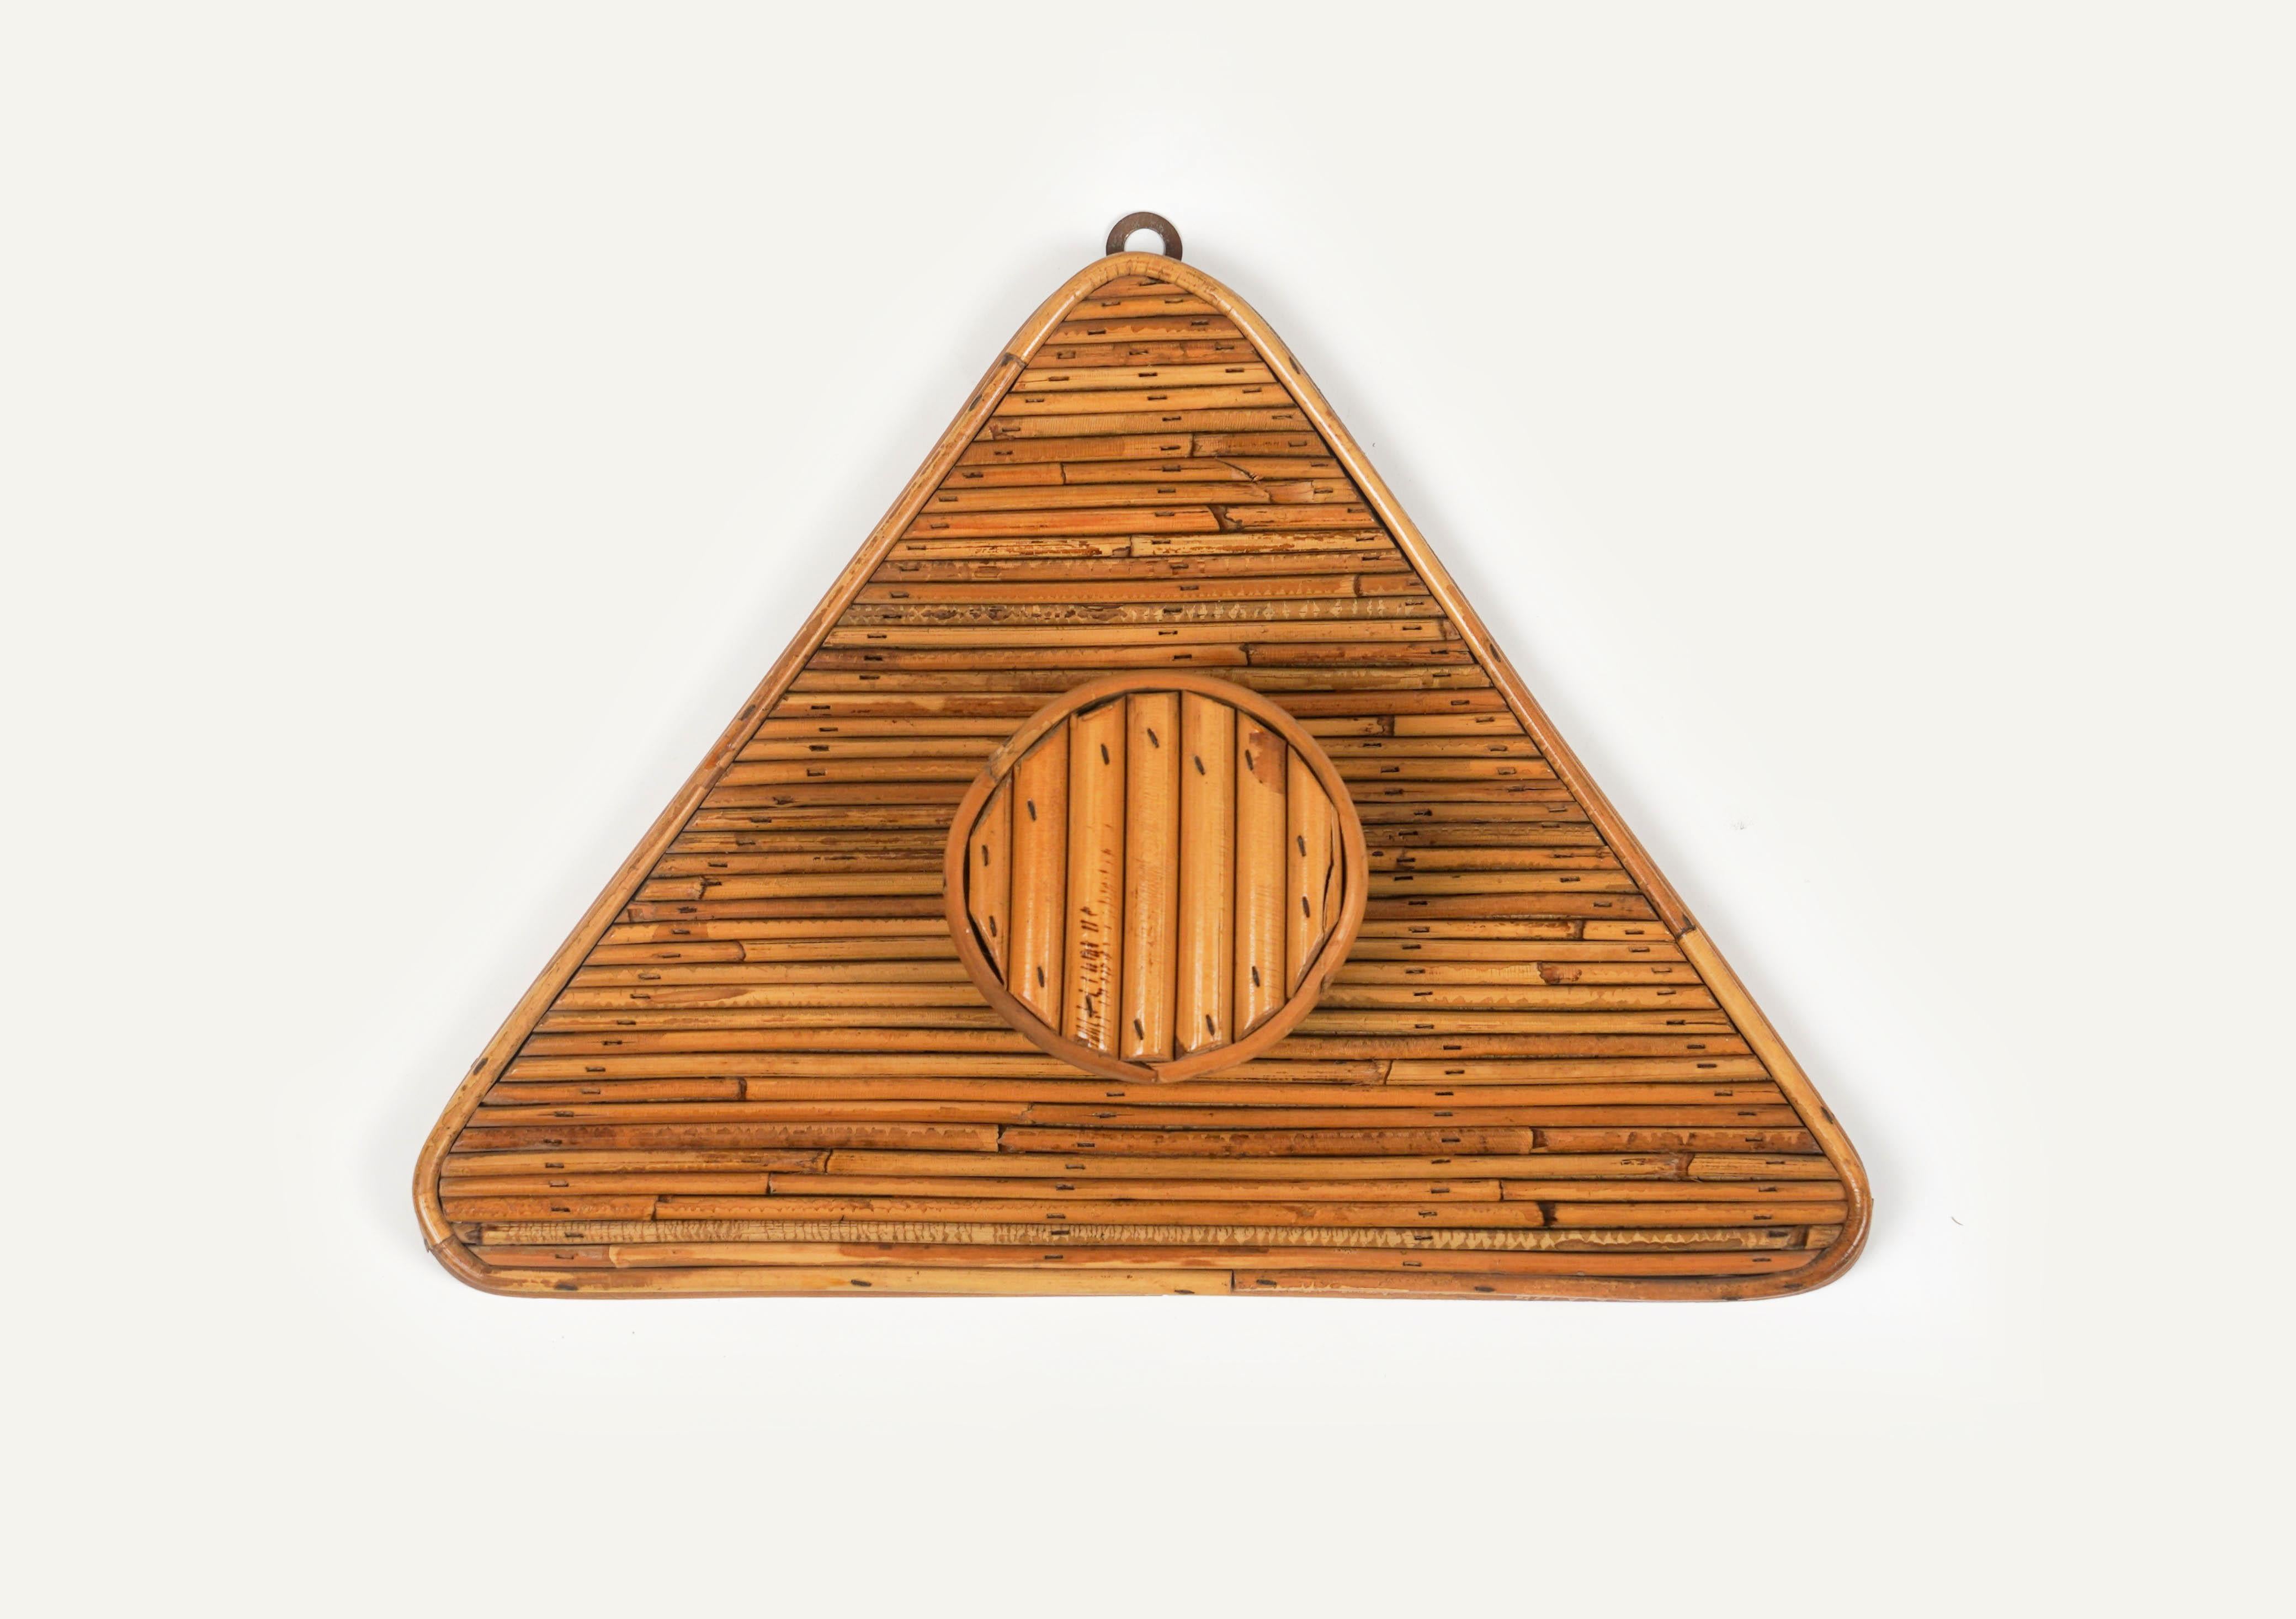 Beautiful midcentury Triangular Coat Rack in bamboo and rattan in the style of Viavai Del Sud.

Made in Italy in the 1960s.

Vivai del sud, Gabriella Crespi and Arpex were the three leading design studios in 60/70s Italy specialized in this high-end